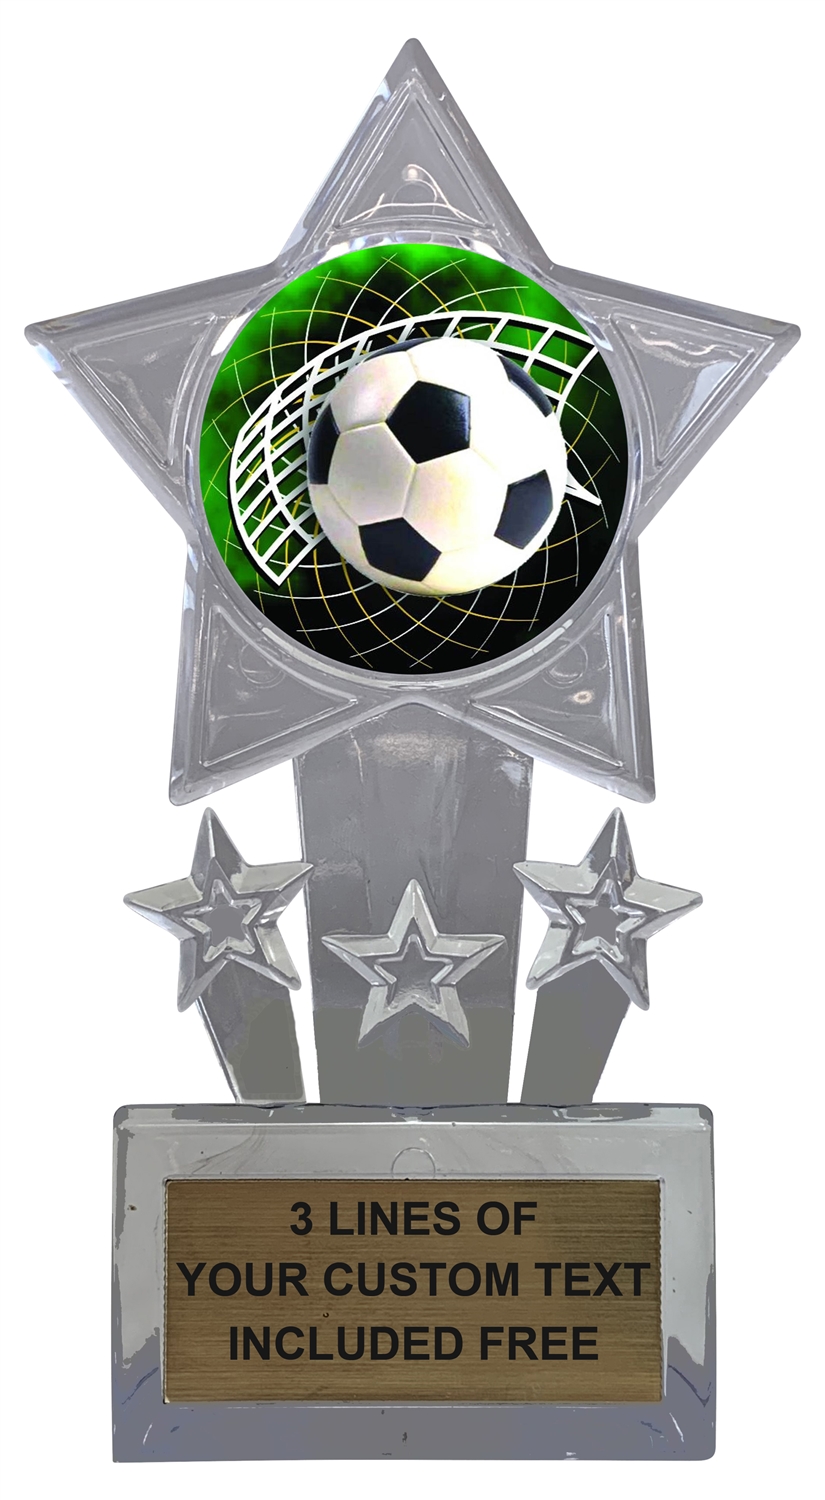 Soccer Trophy Cup